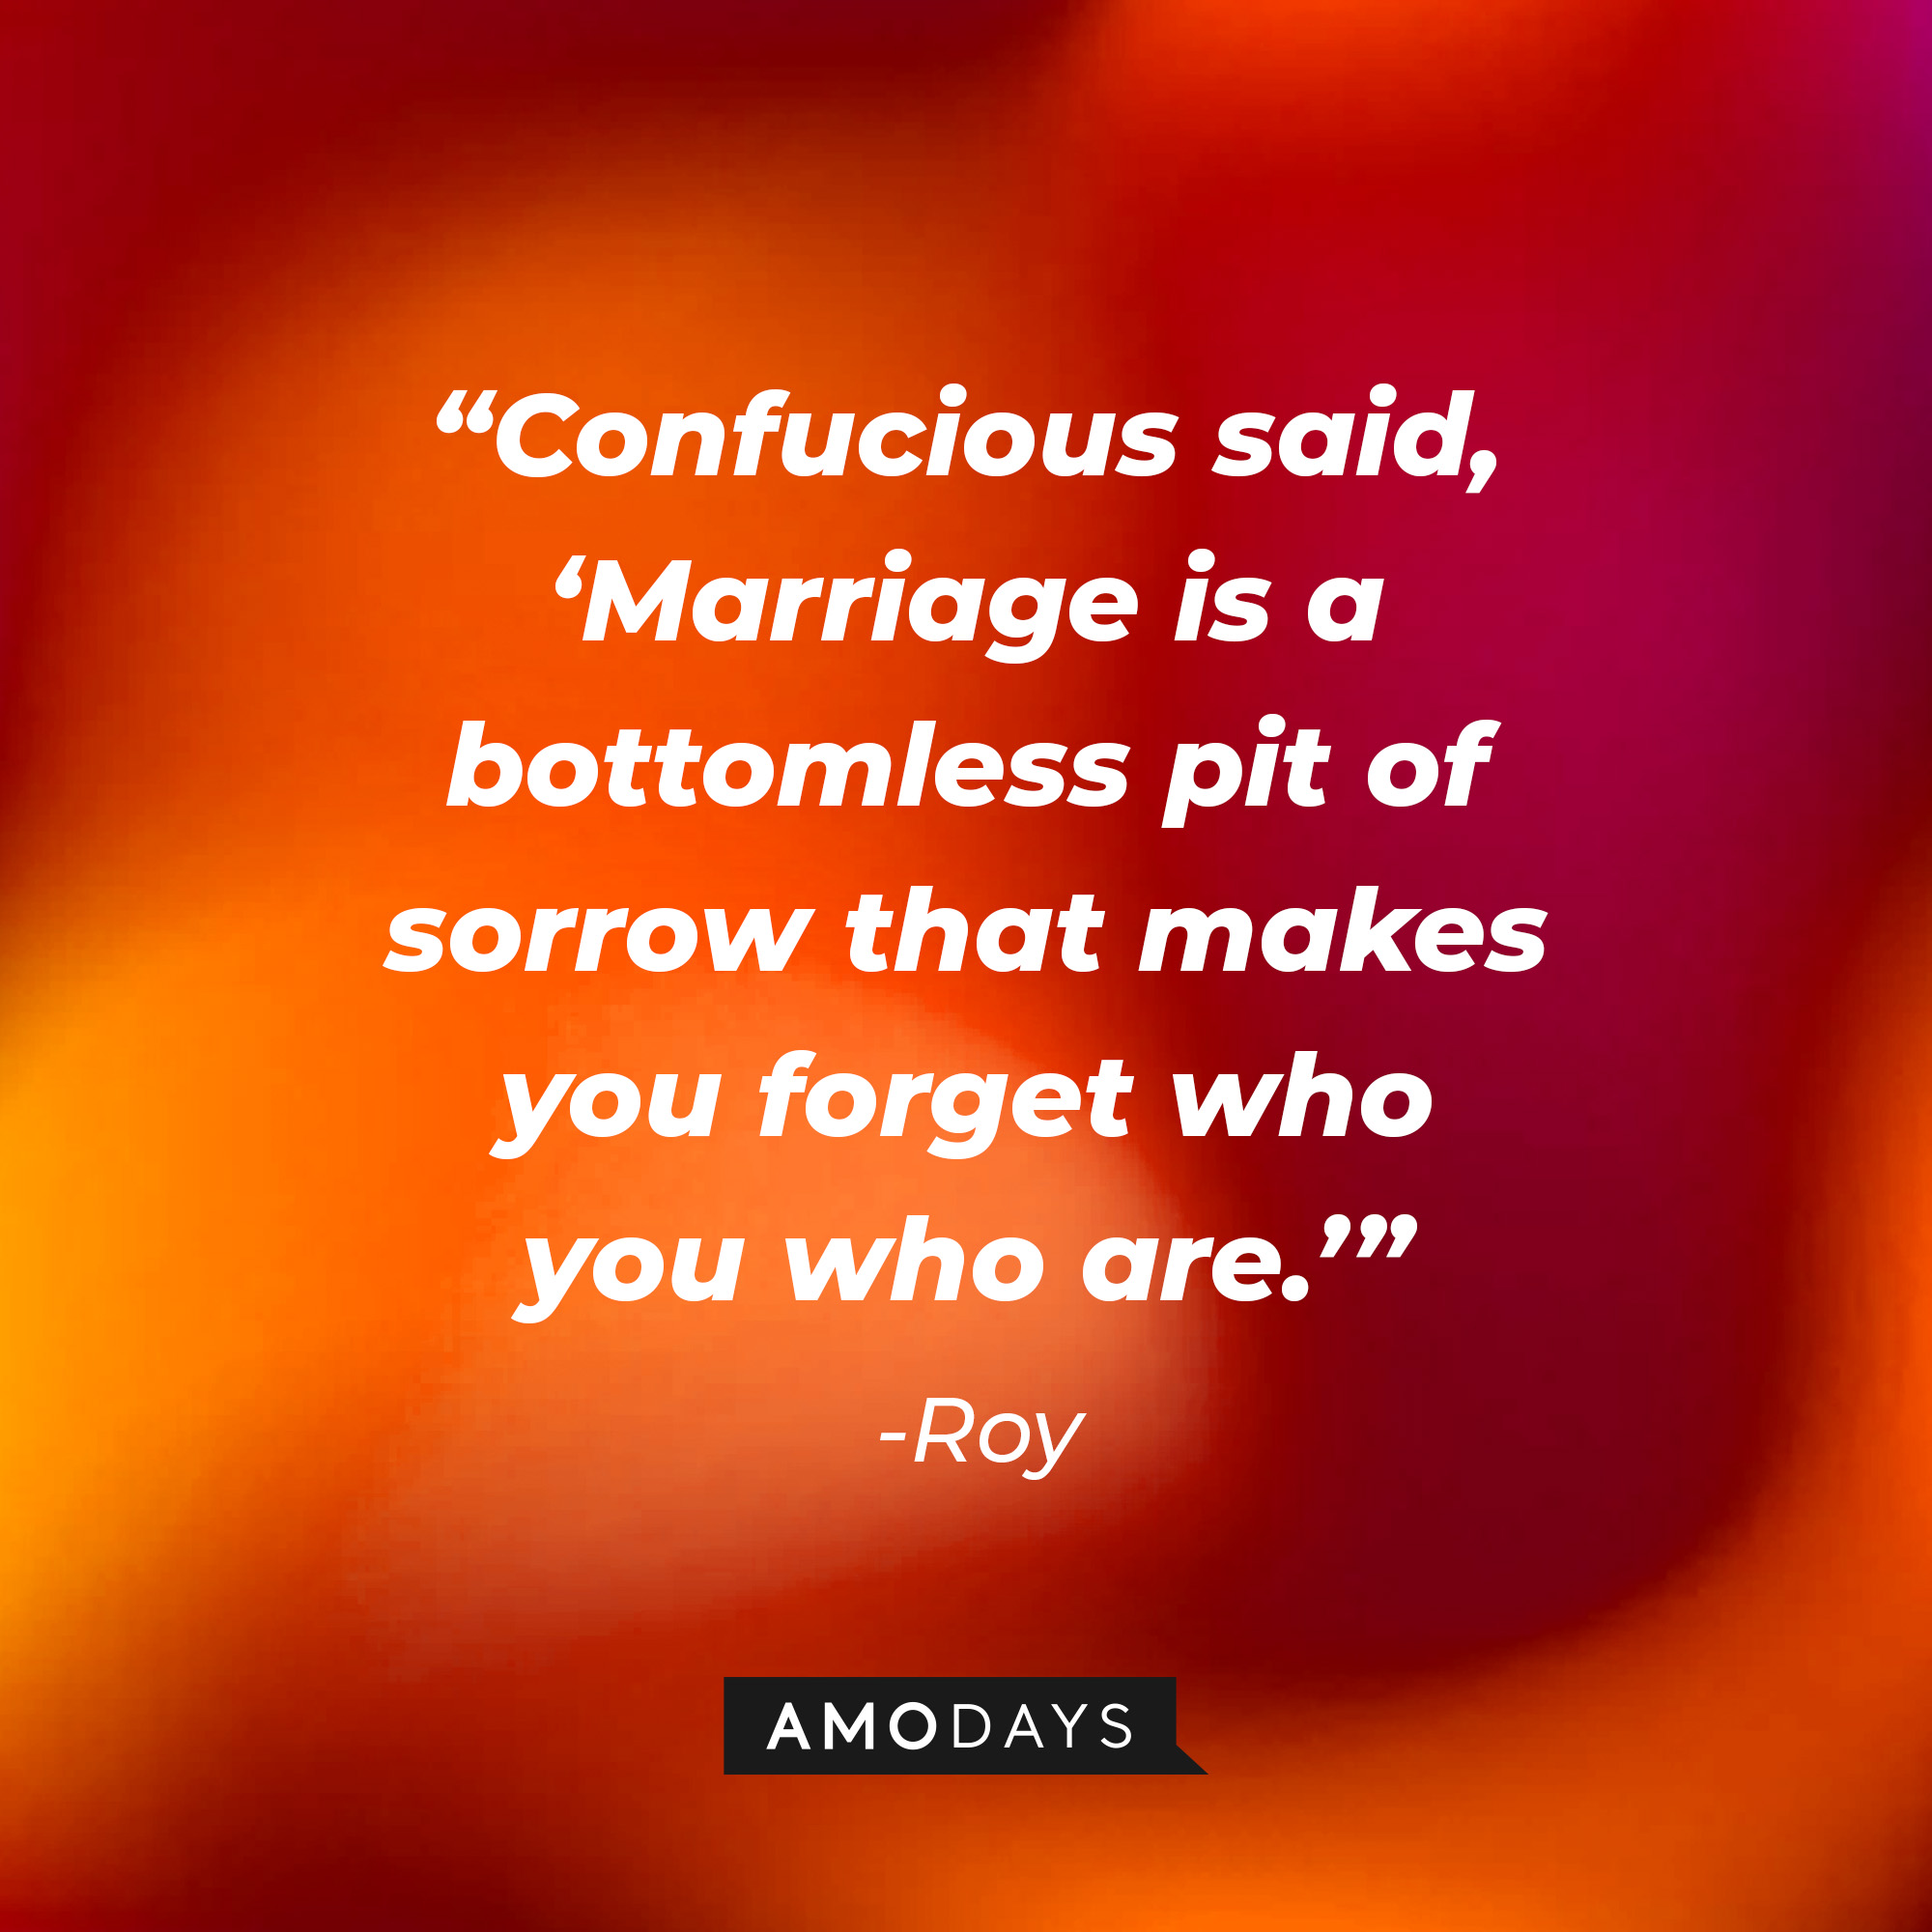 Roy’s quote: “Confucious said, ‘Marriage is a bottomless pit of sorrow that makes you forget who you who are.’”│ Source: AmoDays